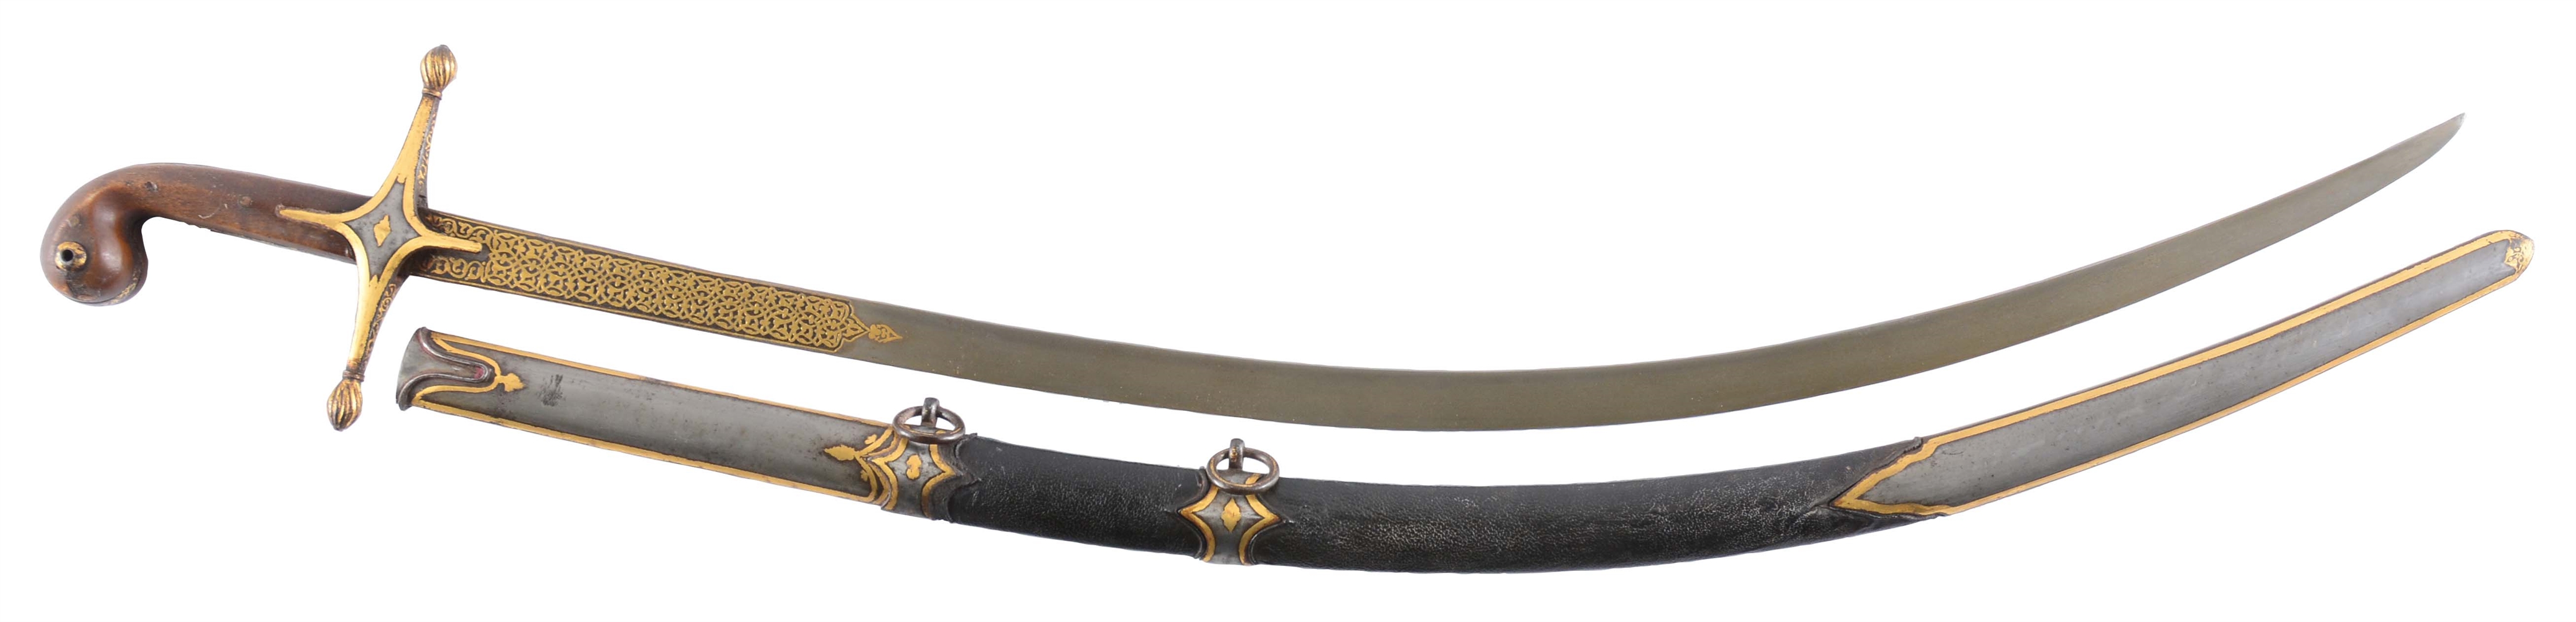 EXTREMELY FINE & RARE 18TH/19TH CENTURY OTTOMAN SHAMSHIR WITH FINE WATERED WOOTZ BLADE & SUPERB HEAVY GOLD DAMASCENE DECORATION IN ORIGINAL SCABBARD.